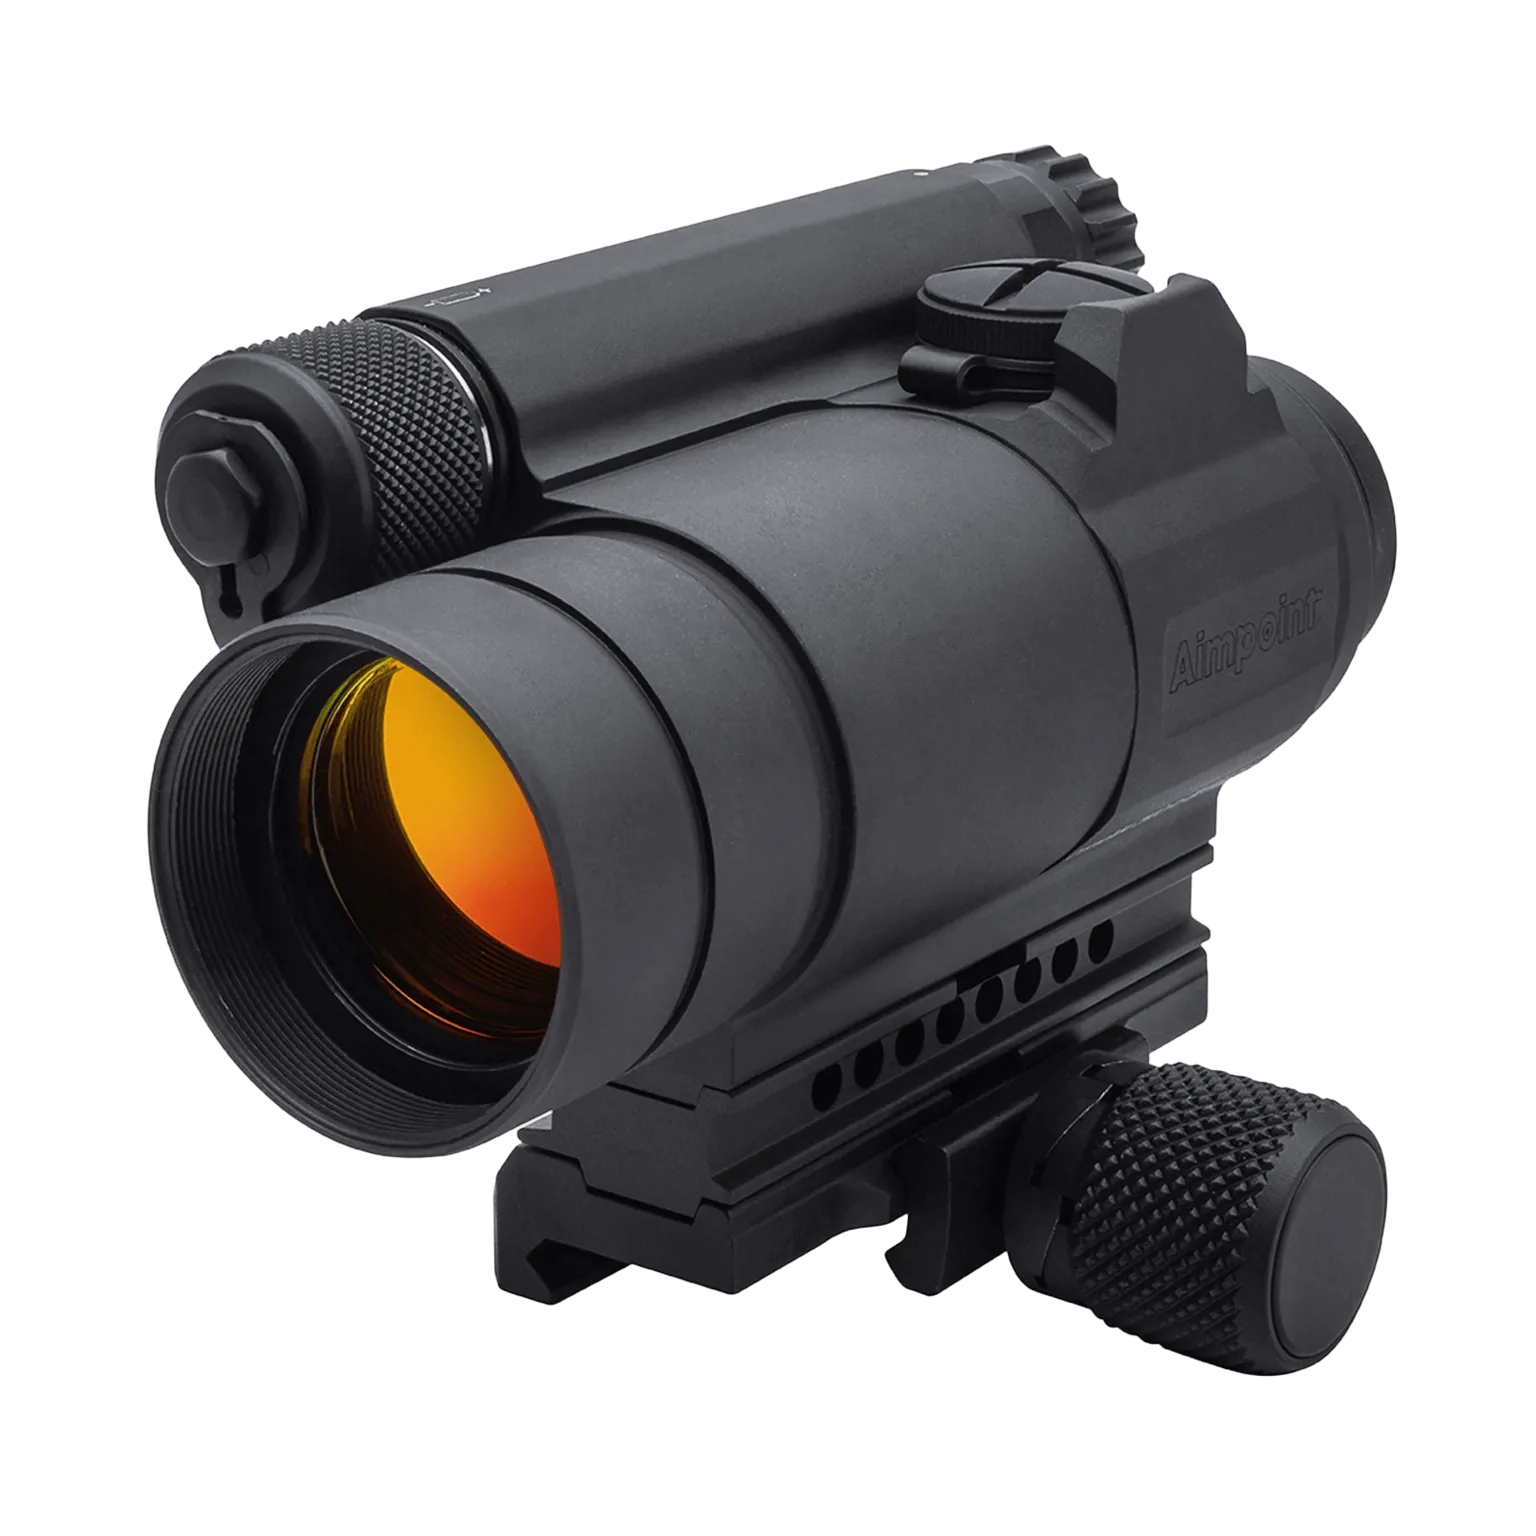 CompM4™ 2 MOA - Red dot reflex sight with standard spacer and QRP2 mount - 1